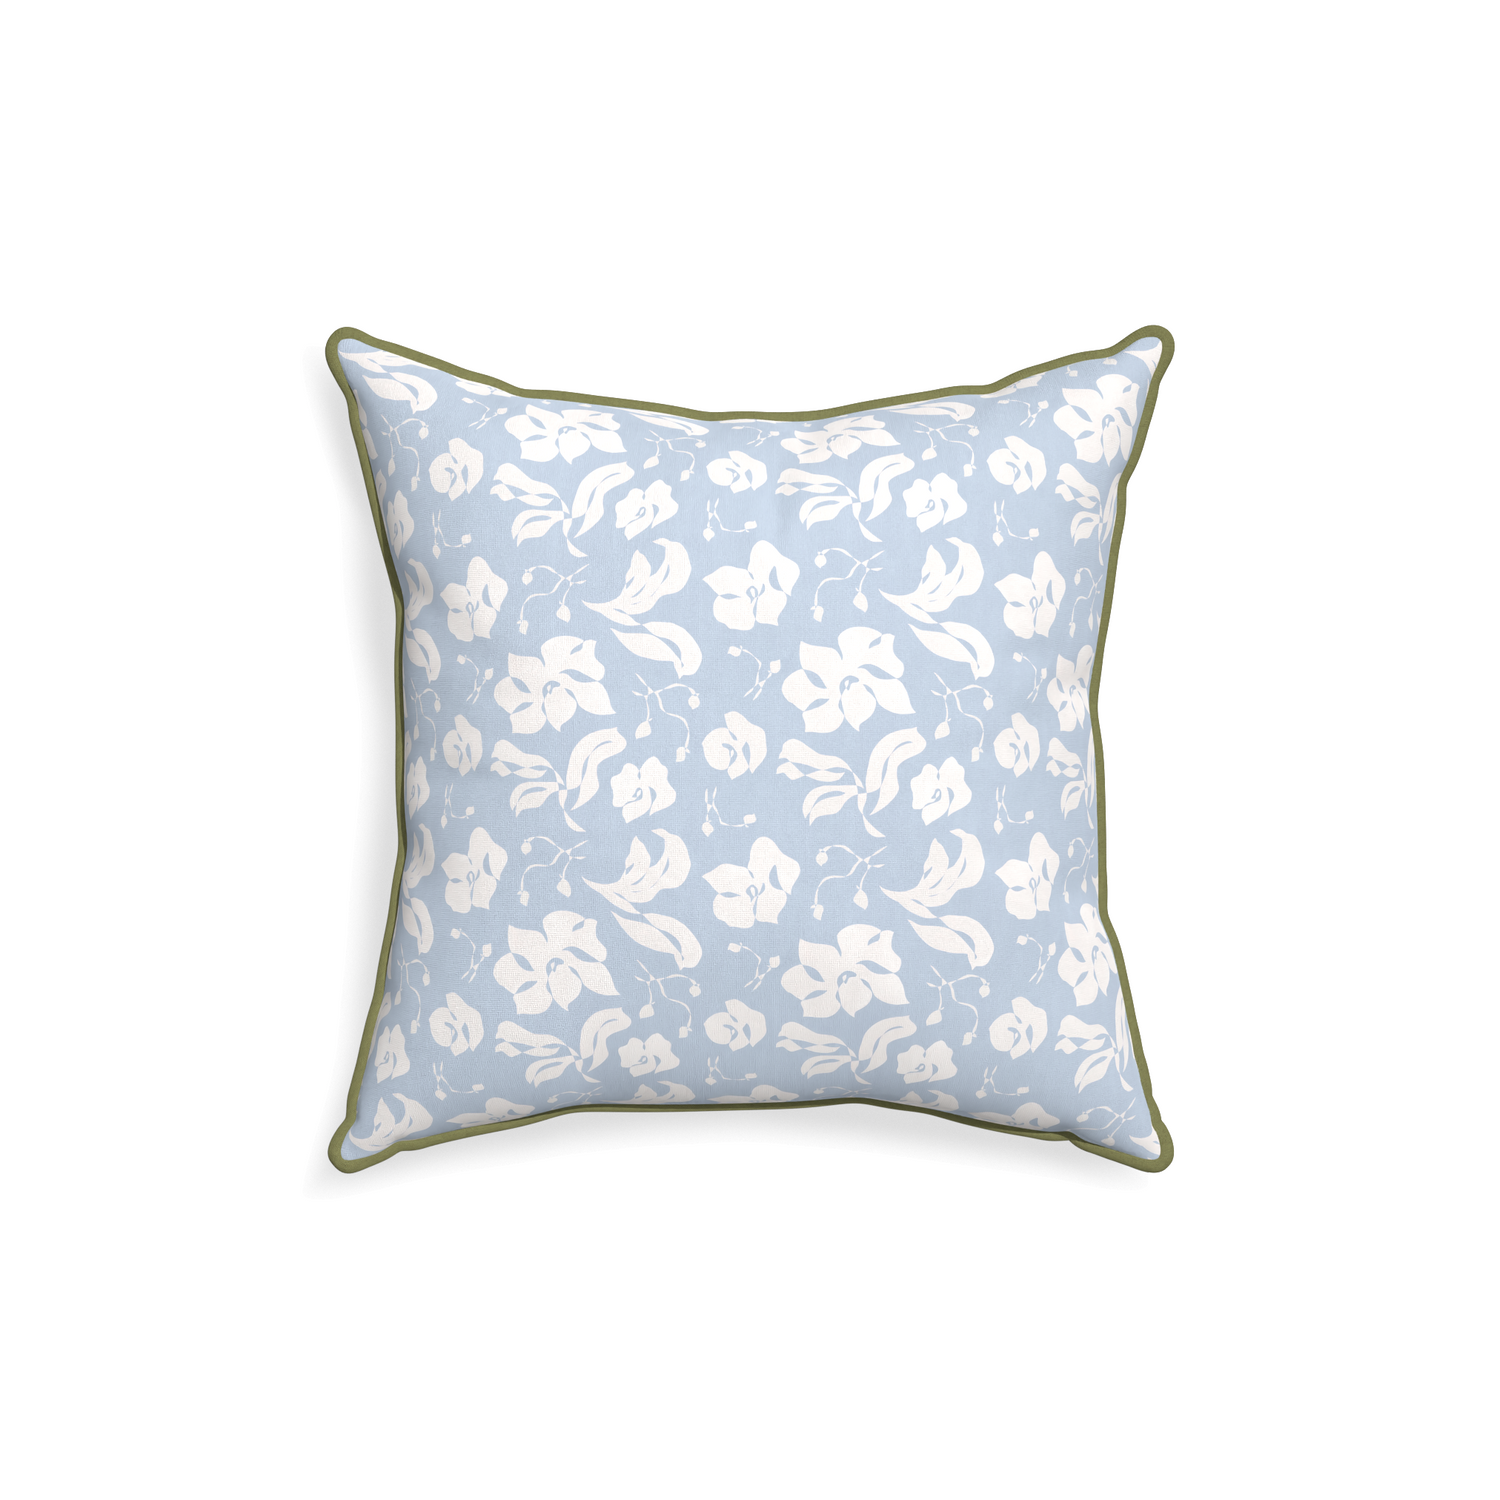 square cornflower blue floral pillow with moss green piping